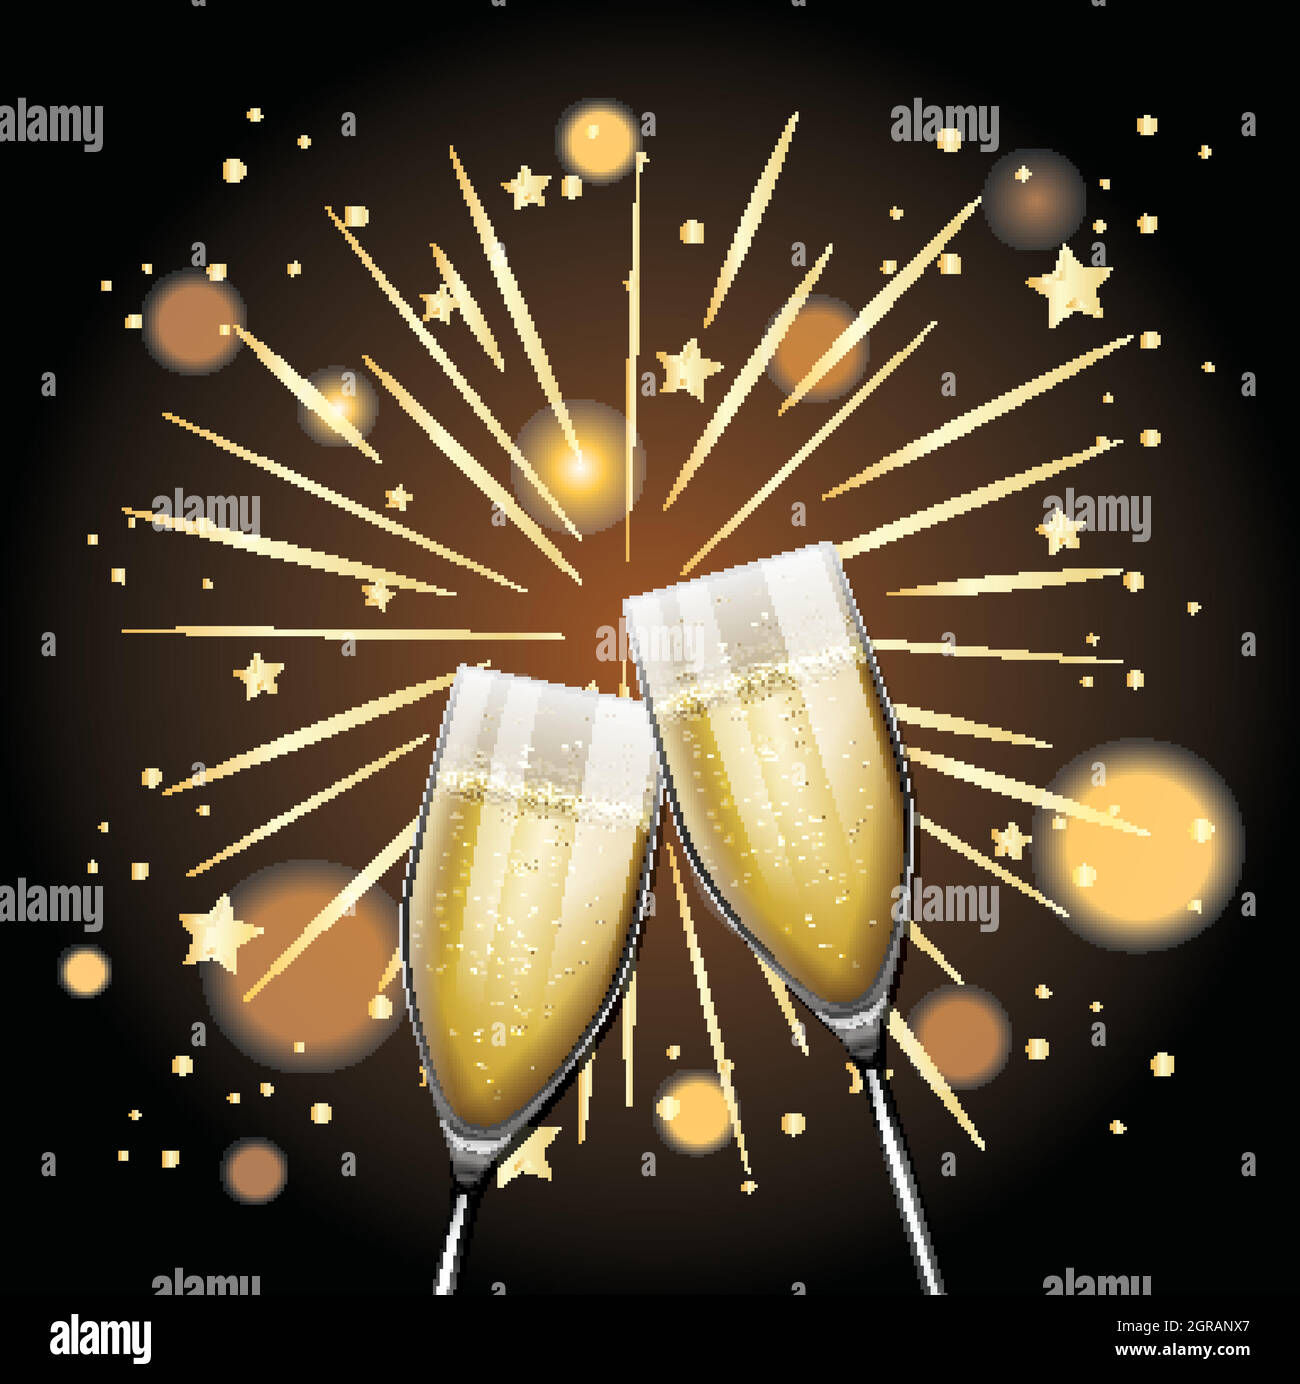 Poster design for New Year with two glasses of champagne Stock Vector